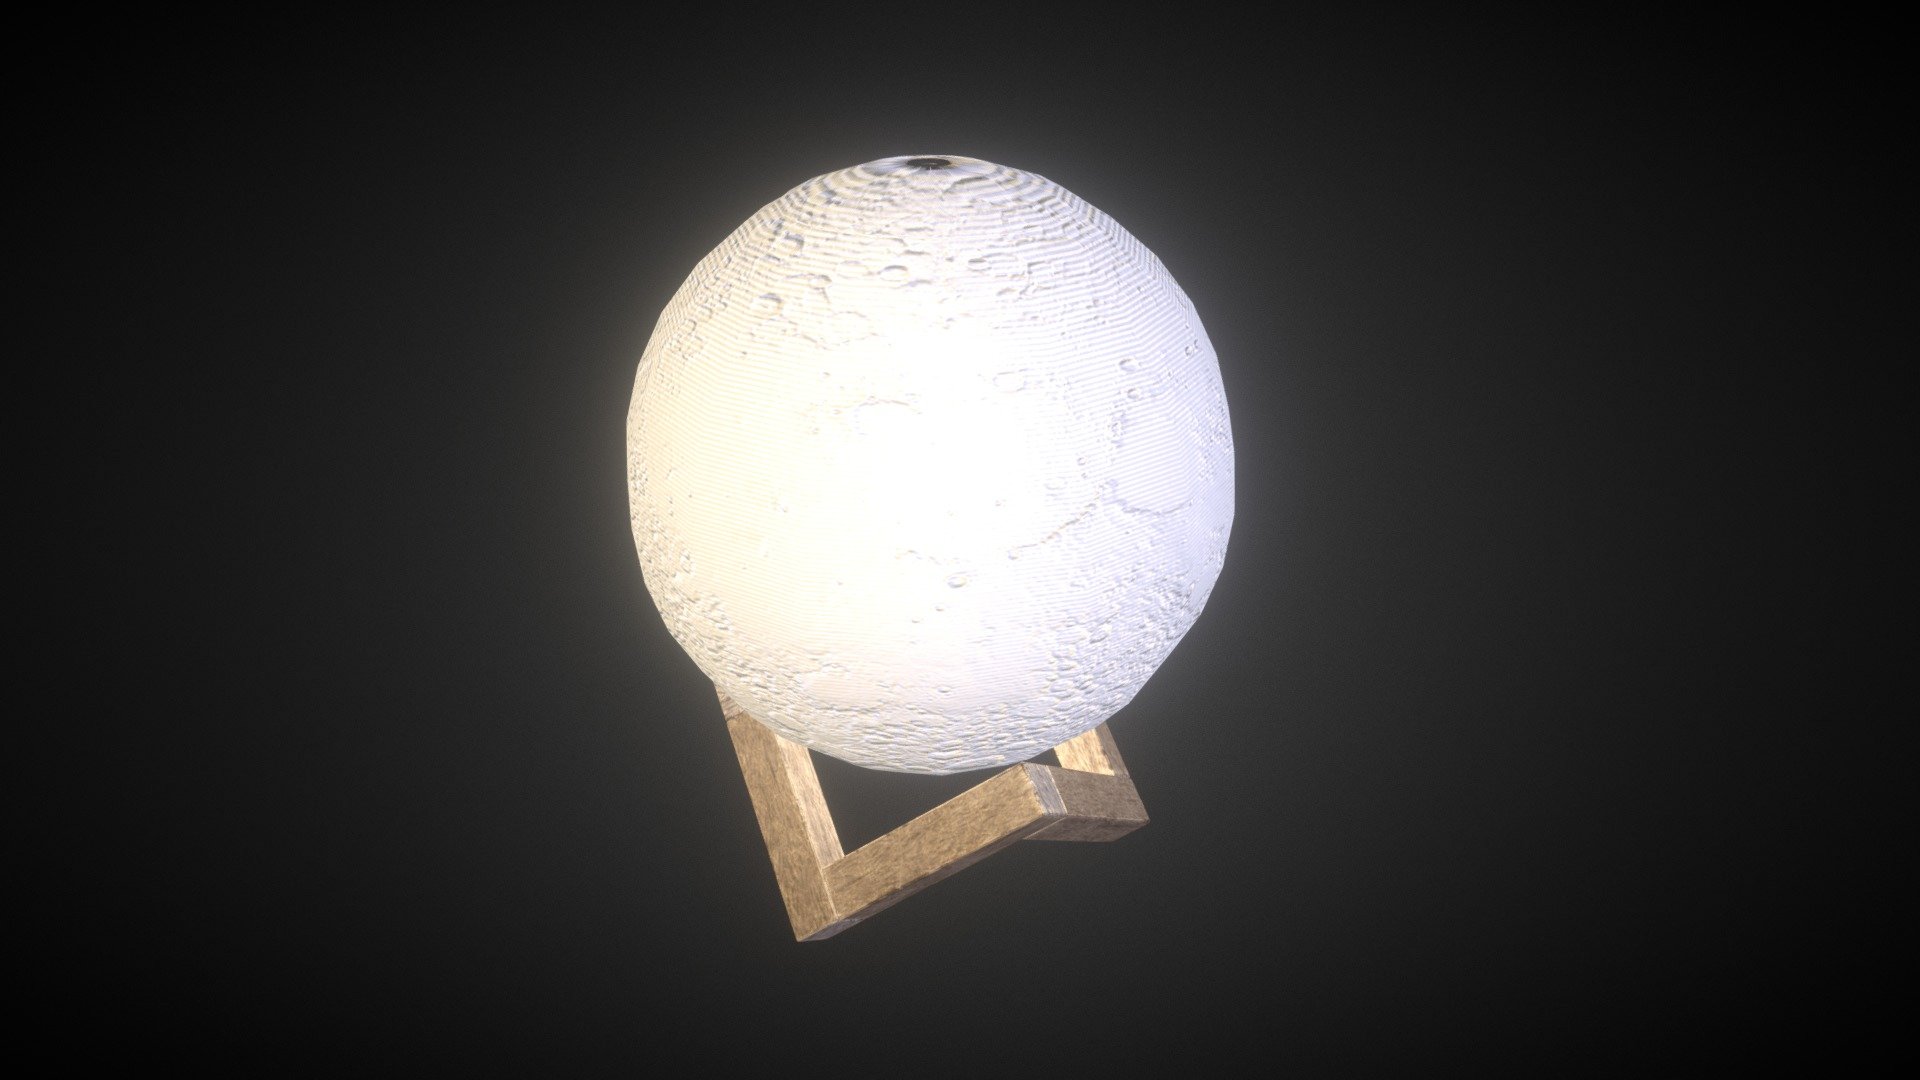 Based off of the 3D Printed Moon Lamp Rechargeable Touch/Tap/Remote Control from Photo Moon Lamp. &ndash; Moon Texture from NASA's CGI Moon Kit [https://svs.gsfc.nasa.gov/4720].

Modeled in Maya and textured in Substance Painter in 2020 3d model